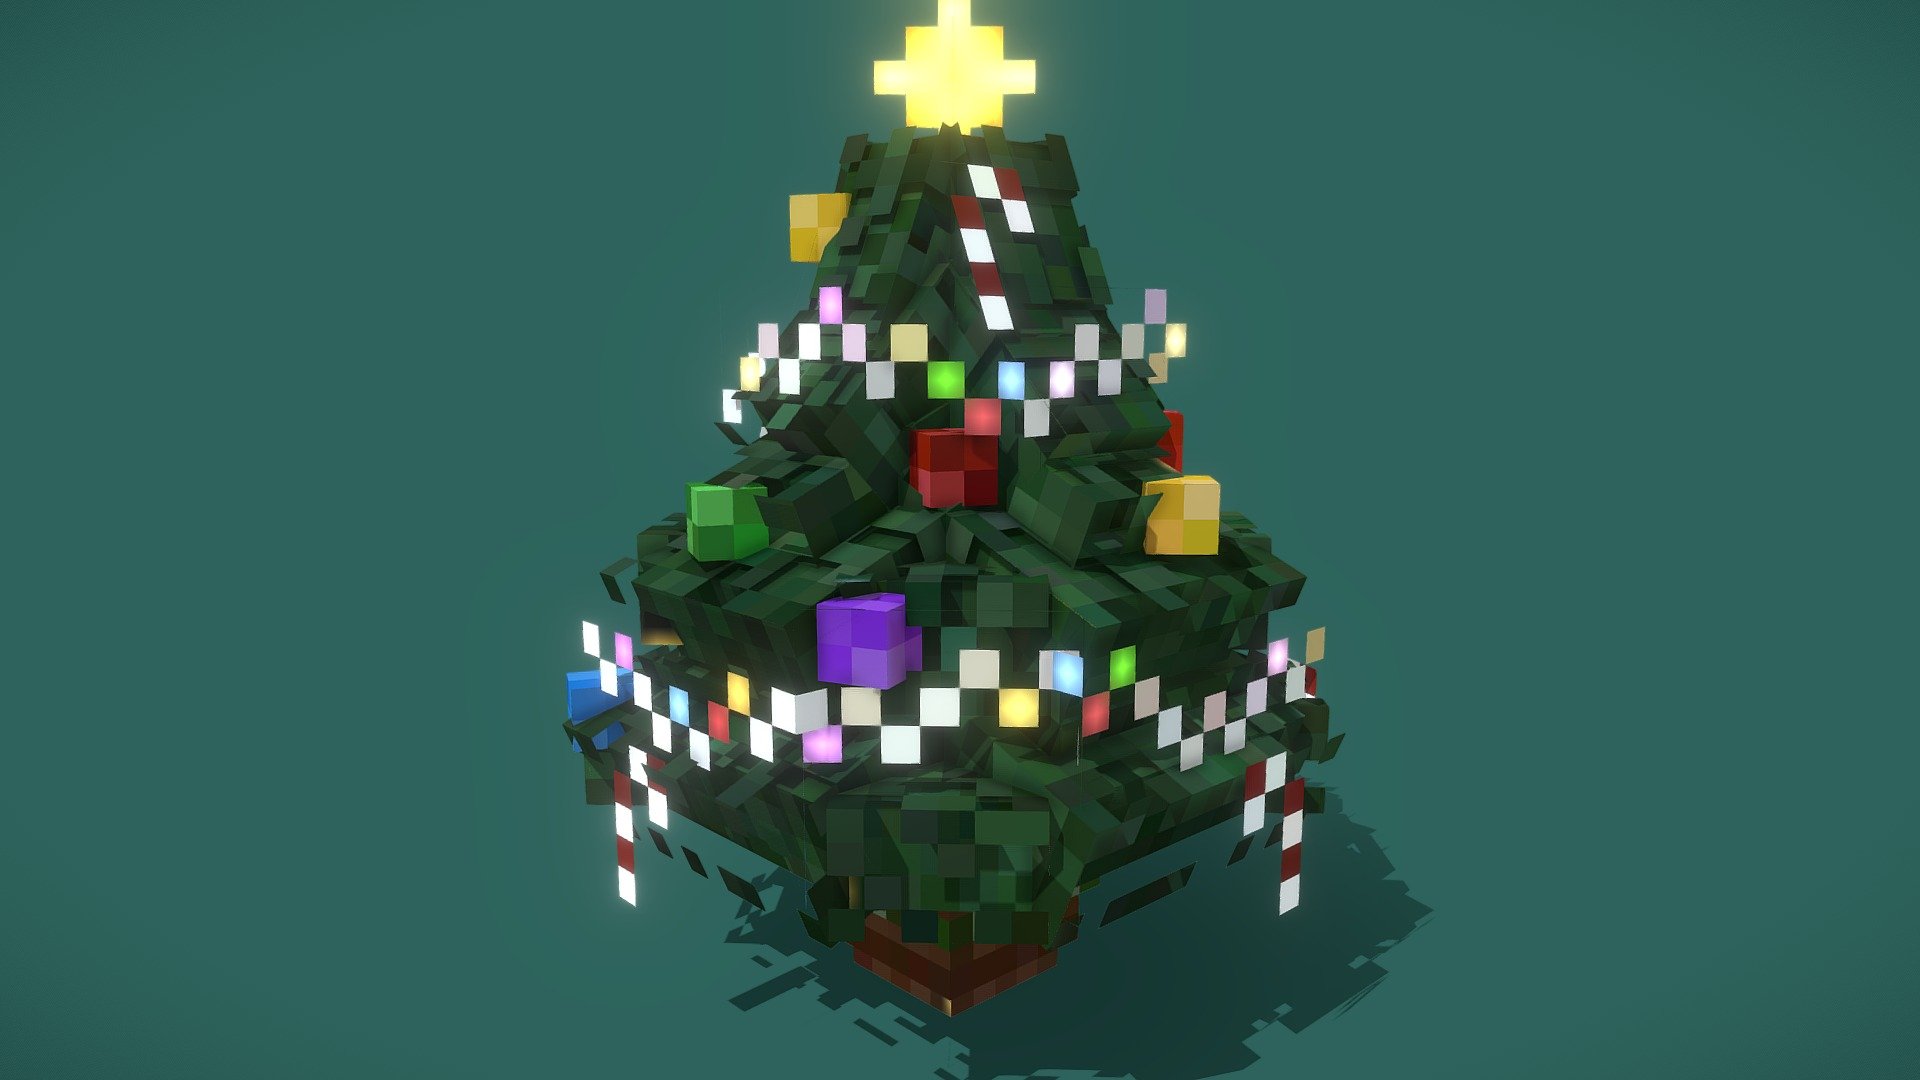 Hi guys! I hope you're doing great! Today I decided to get you in the Christmas spirit by showing you my new custom work to decorate the server lobby&hellip; If you like my work, don't be stingy with the likes, they motivate me to continue to share my creativity with you!  =) - Little xmas tree ❆ - 3D model by D`White (@D_White) 3d model